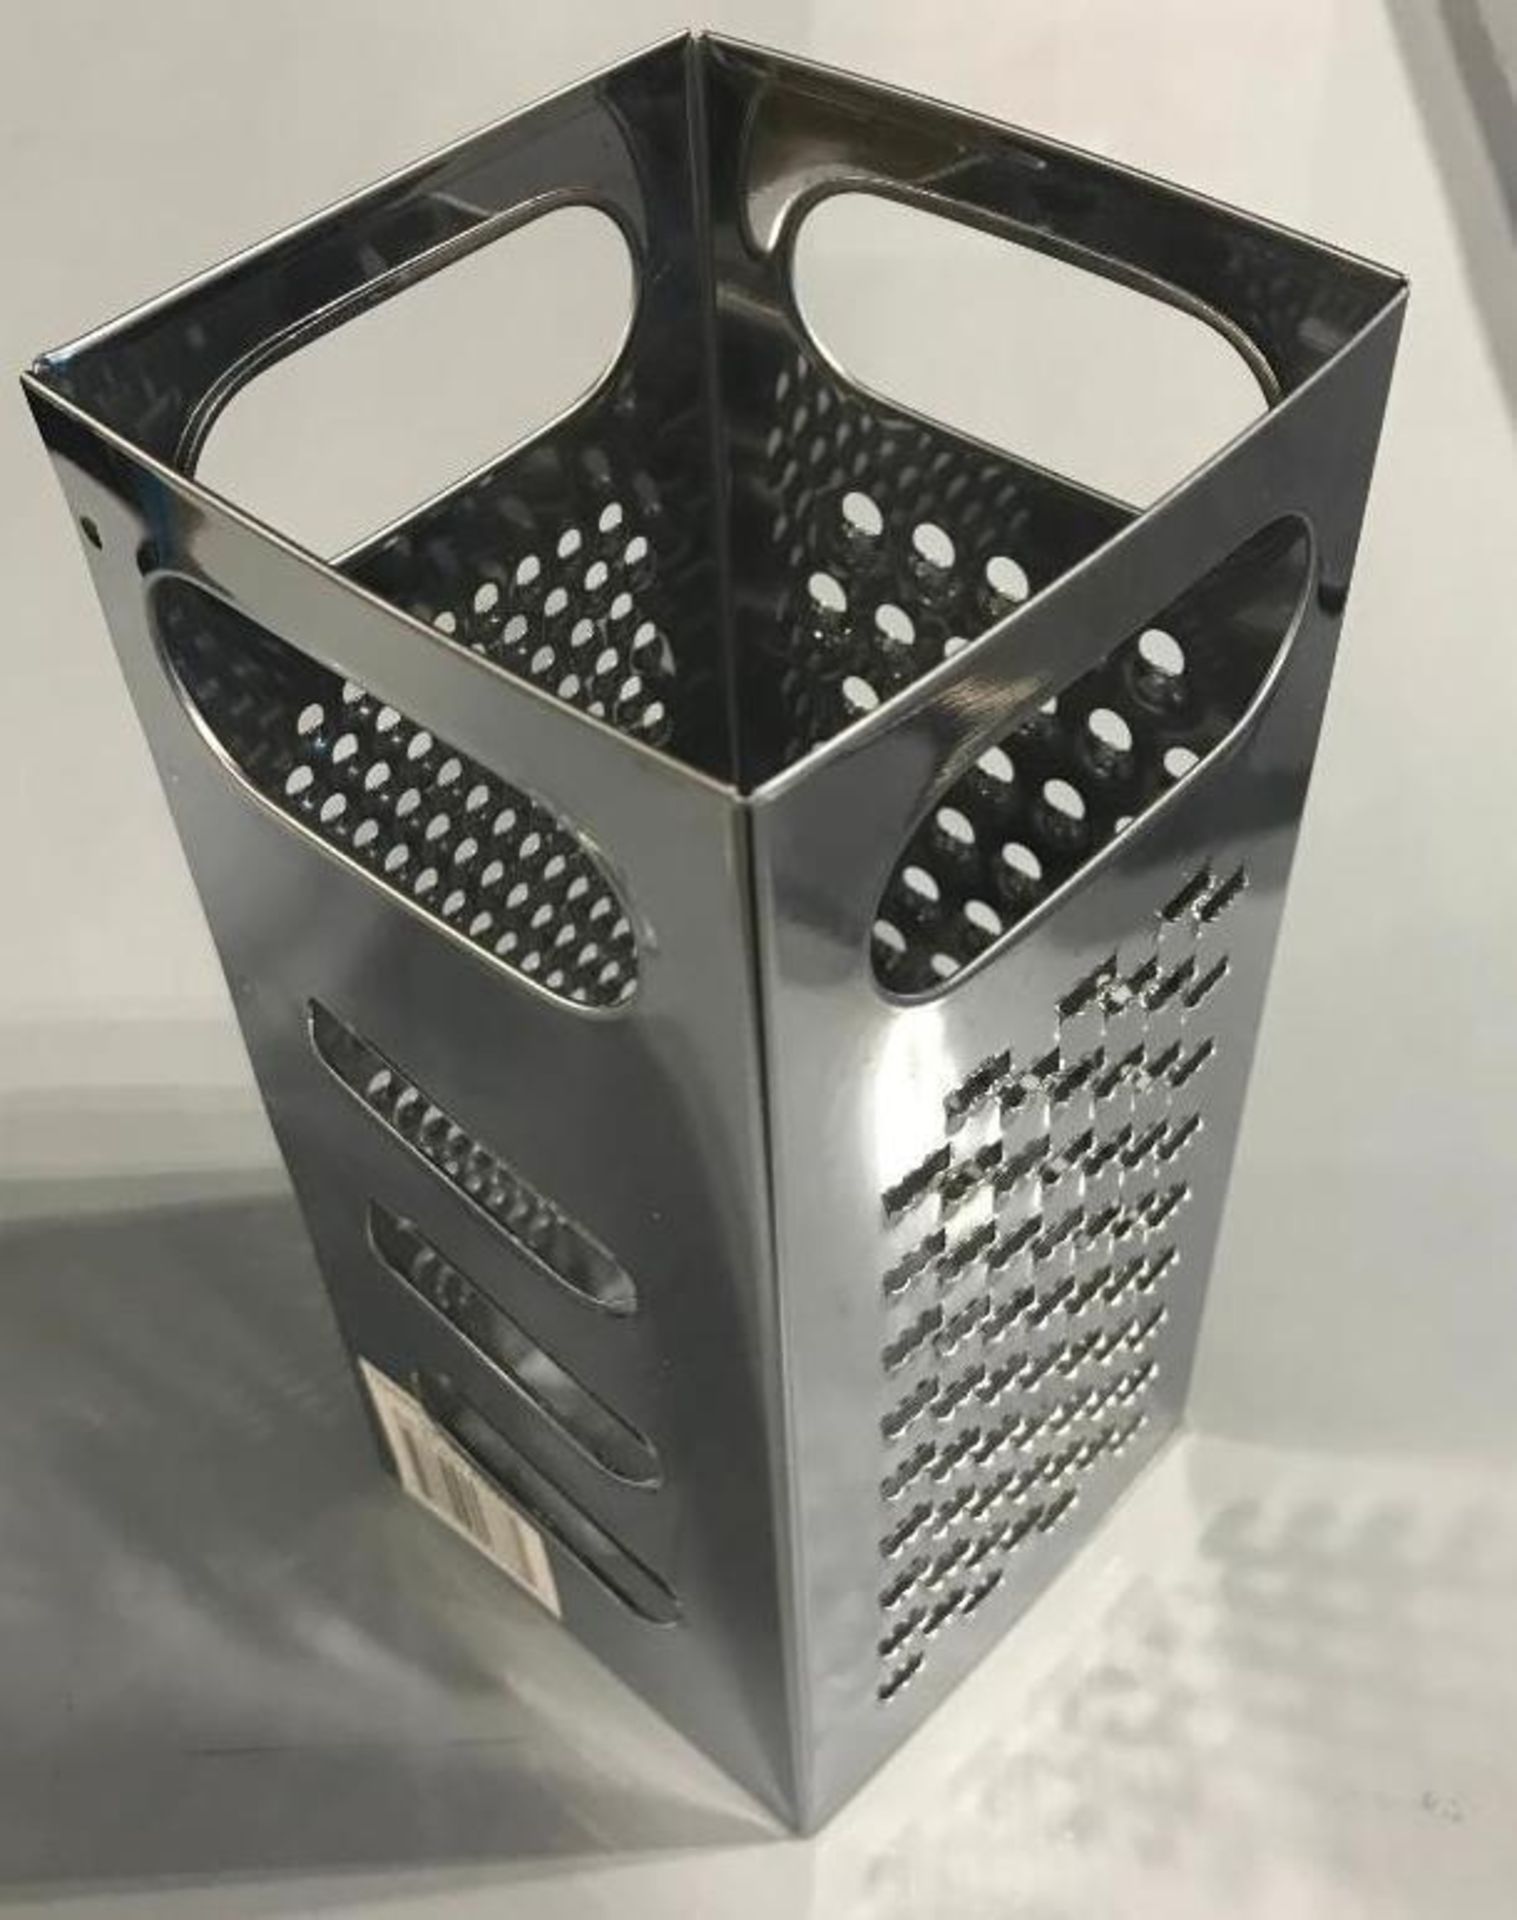 UPDATE INTERNATIONAL FOUR SIDED STAINLESS GRATER, GR-449 - NEW